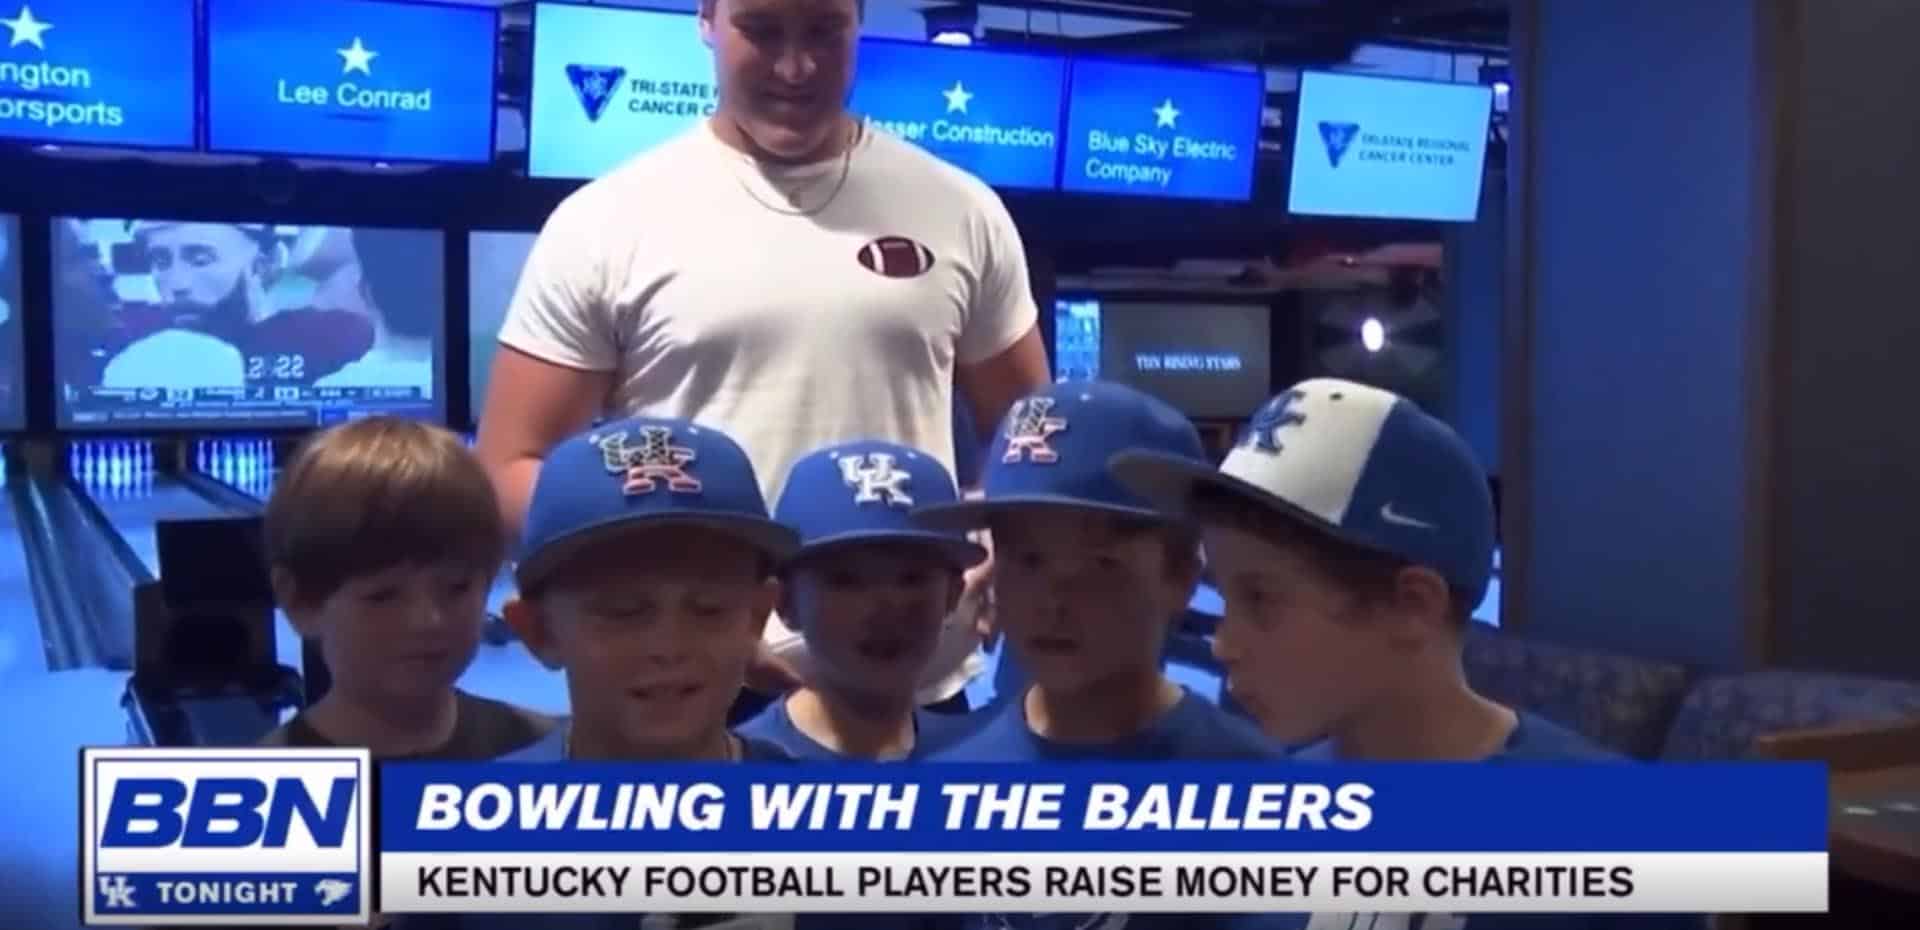 BBN Tonight Covers Bowling With Ballers